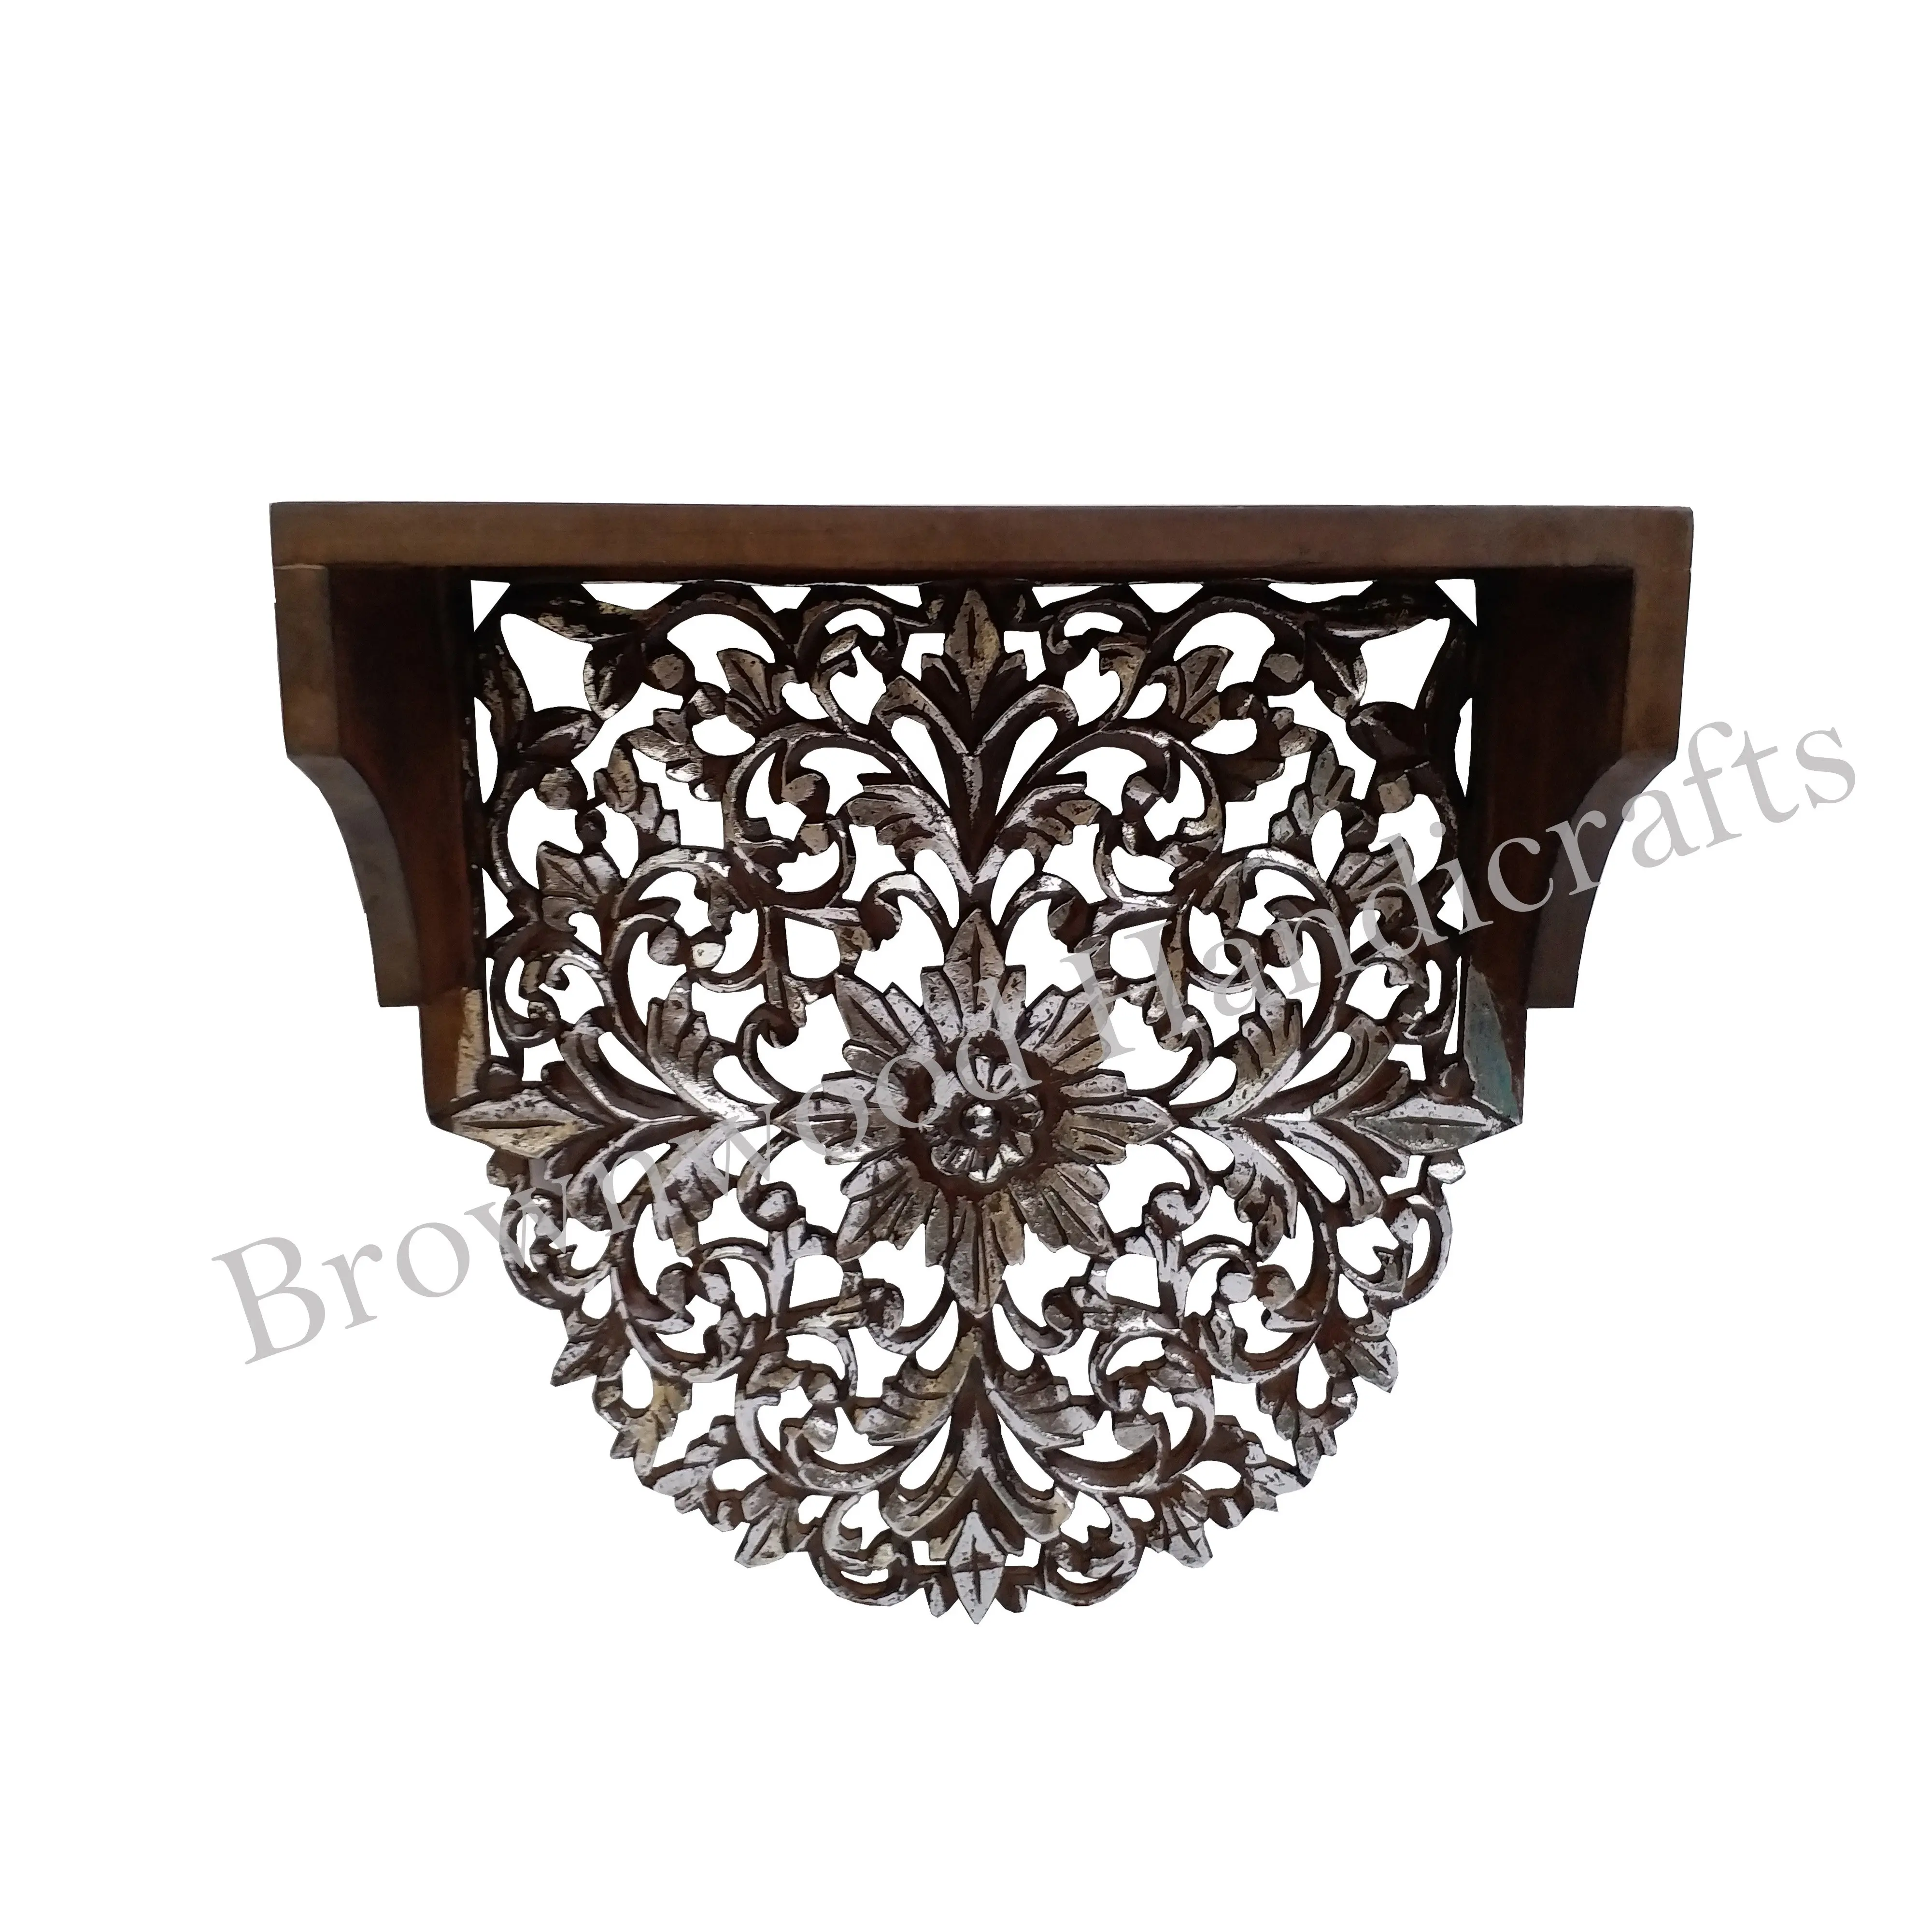 Indian Vintage Home Decorative Floral Design Wooden Hand Carved Wall Shelf / Wall Hanging